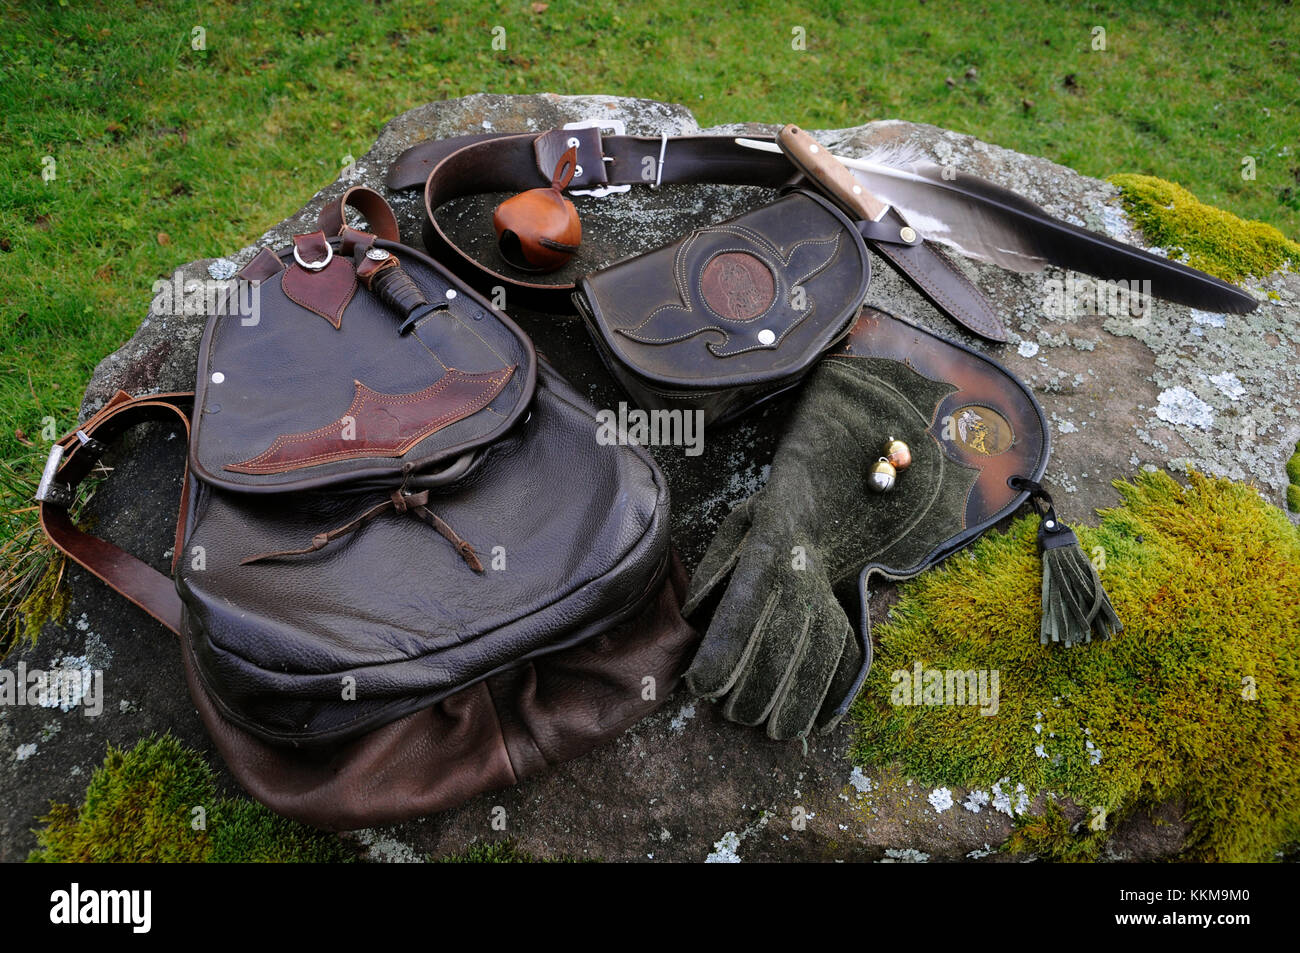 Falconer's equipment on a moss-covered stone arranges Stock Photo